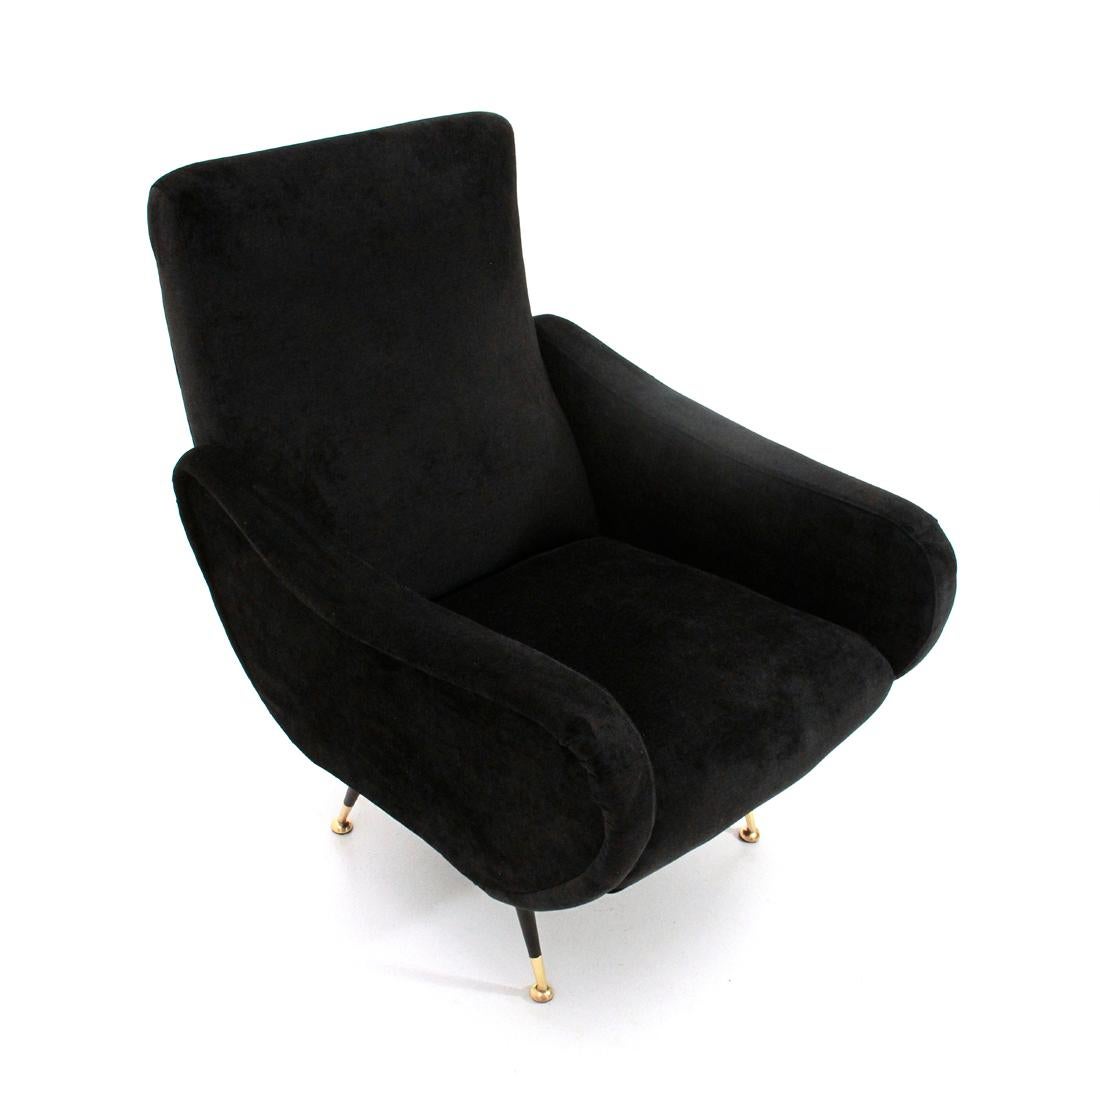 Italian manufacturing armchair produced in the 1950s.
Wooden frame padded and lined with new fabric in black velvet.
Legs in black painted metal and brass feet.
Excellent general conditions.

Dimensions: Width 70 cm, depth 85 cm, height 90 cm,